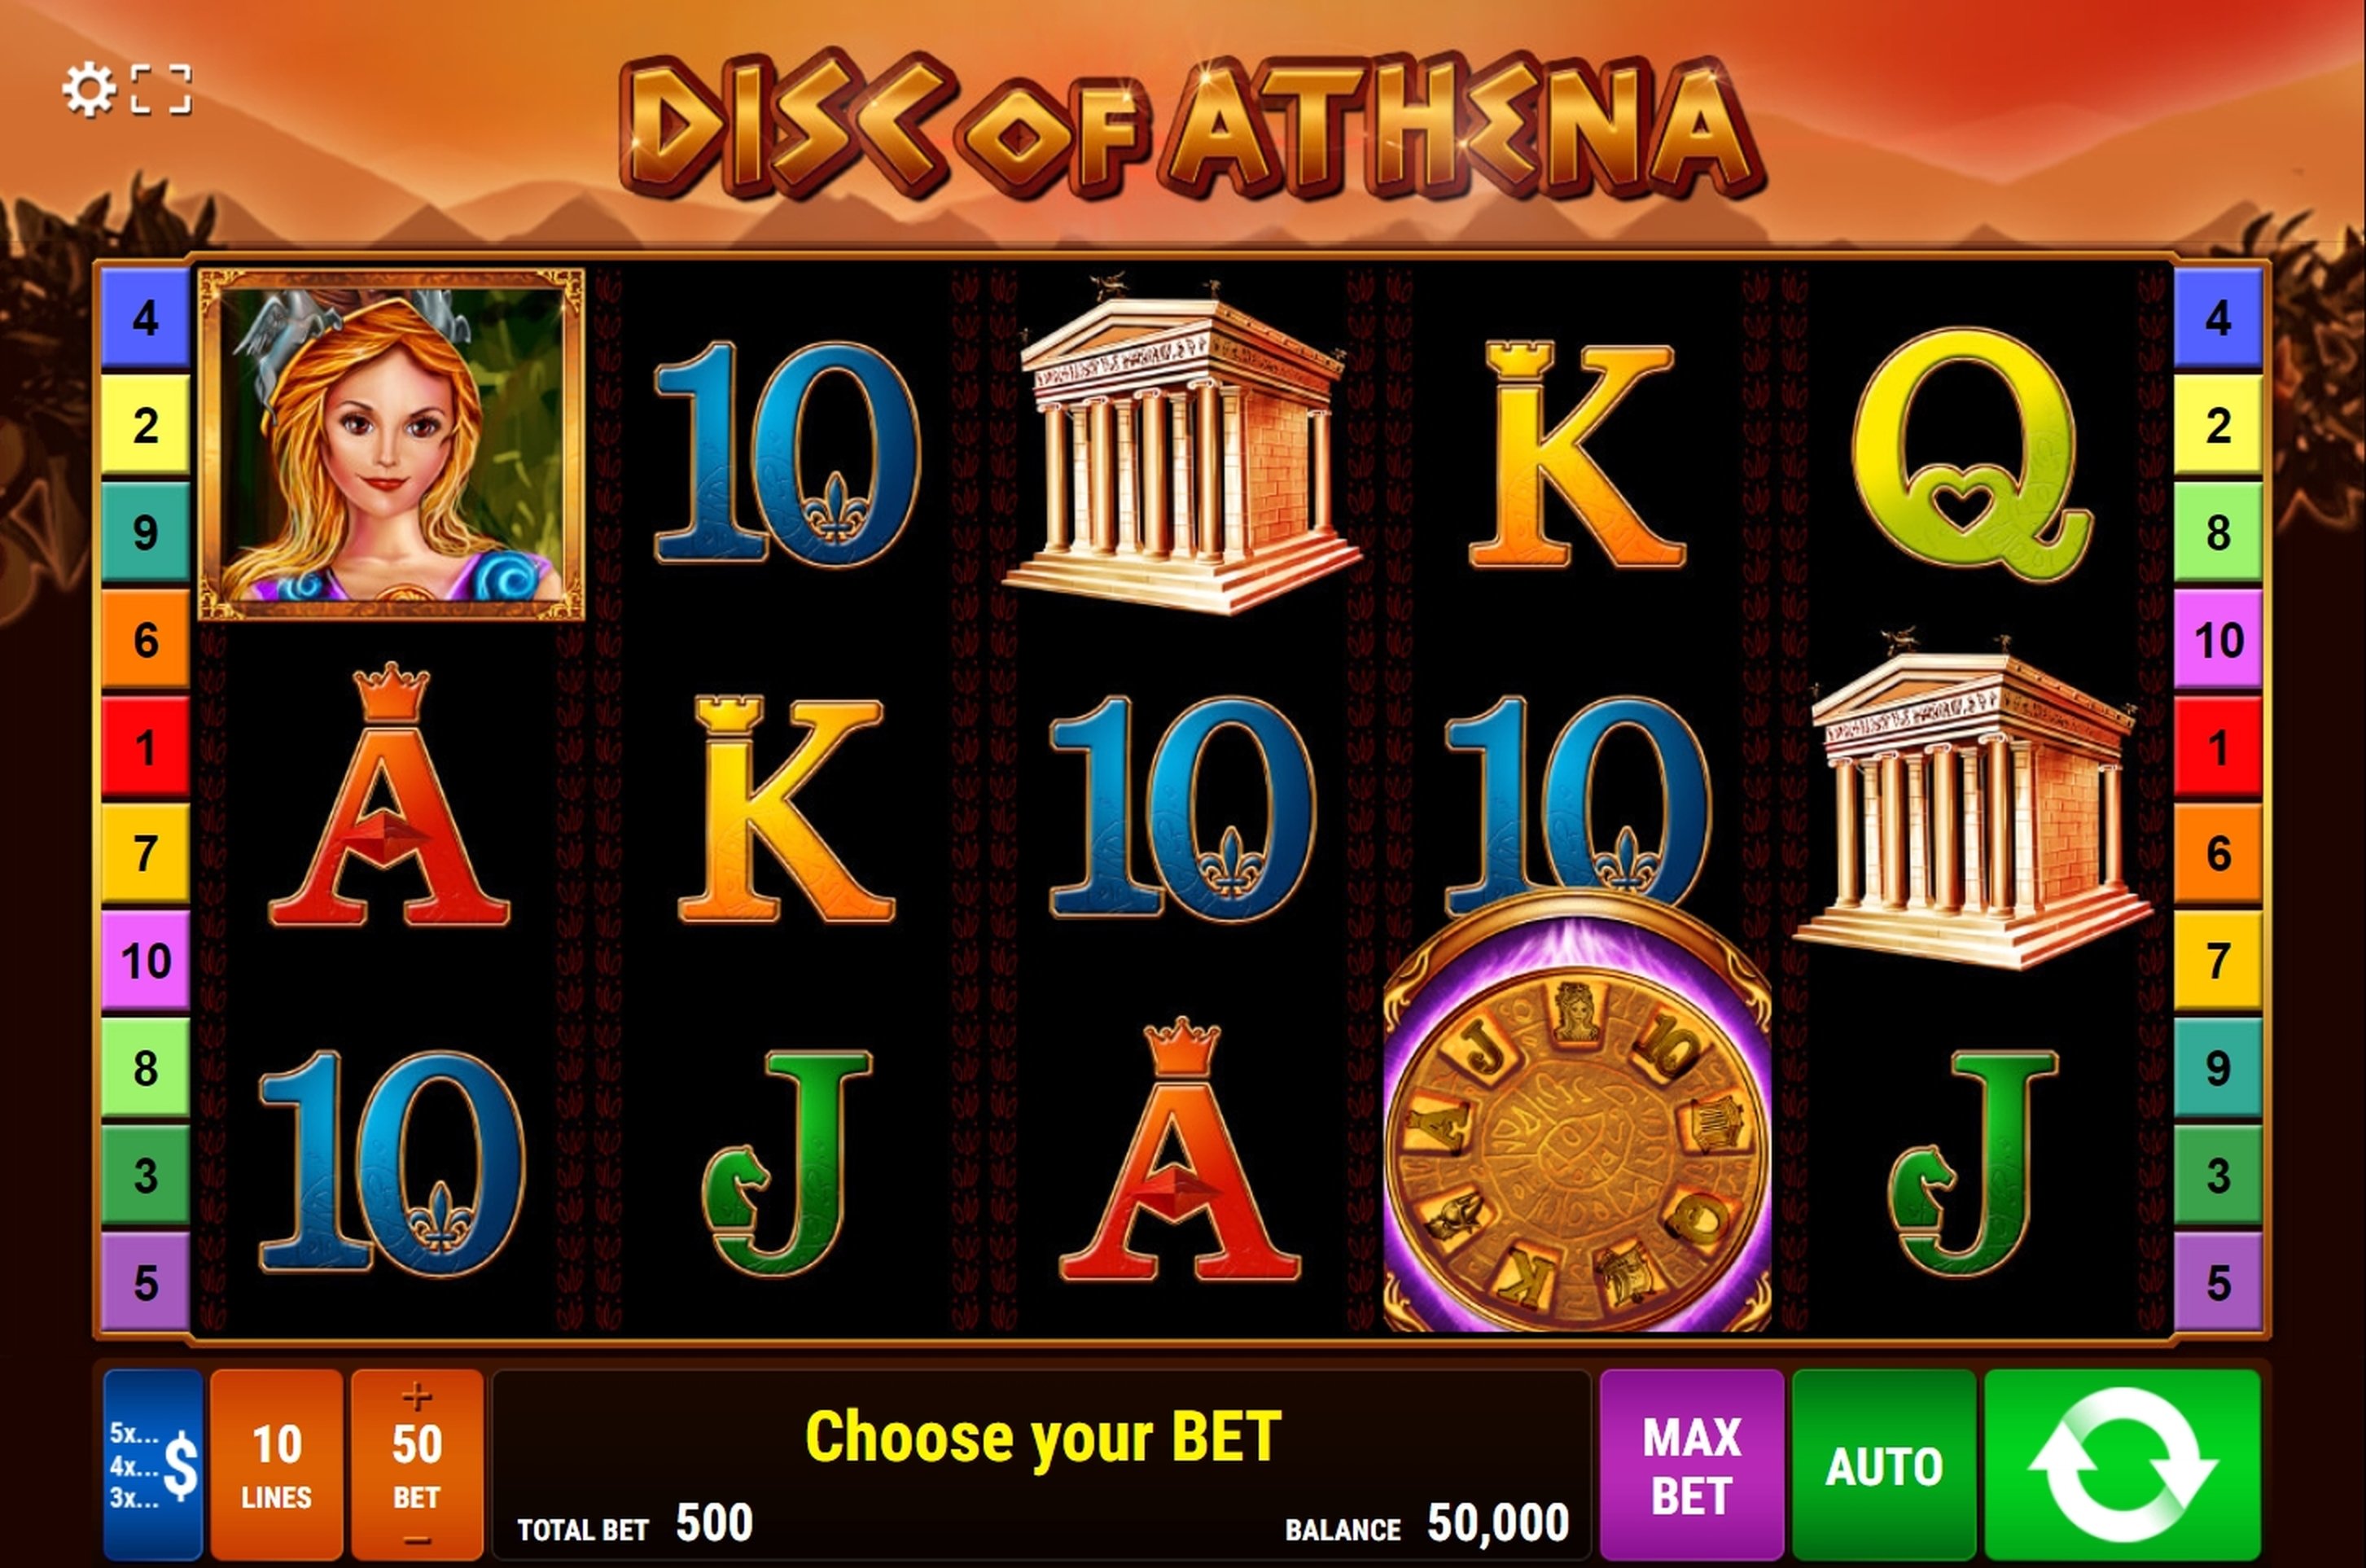 Reels in Disc of Athena Slot Game by Bally Wulff